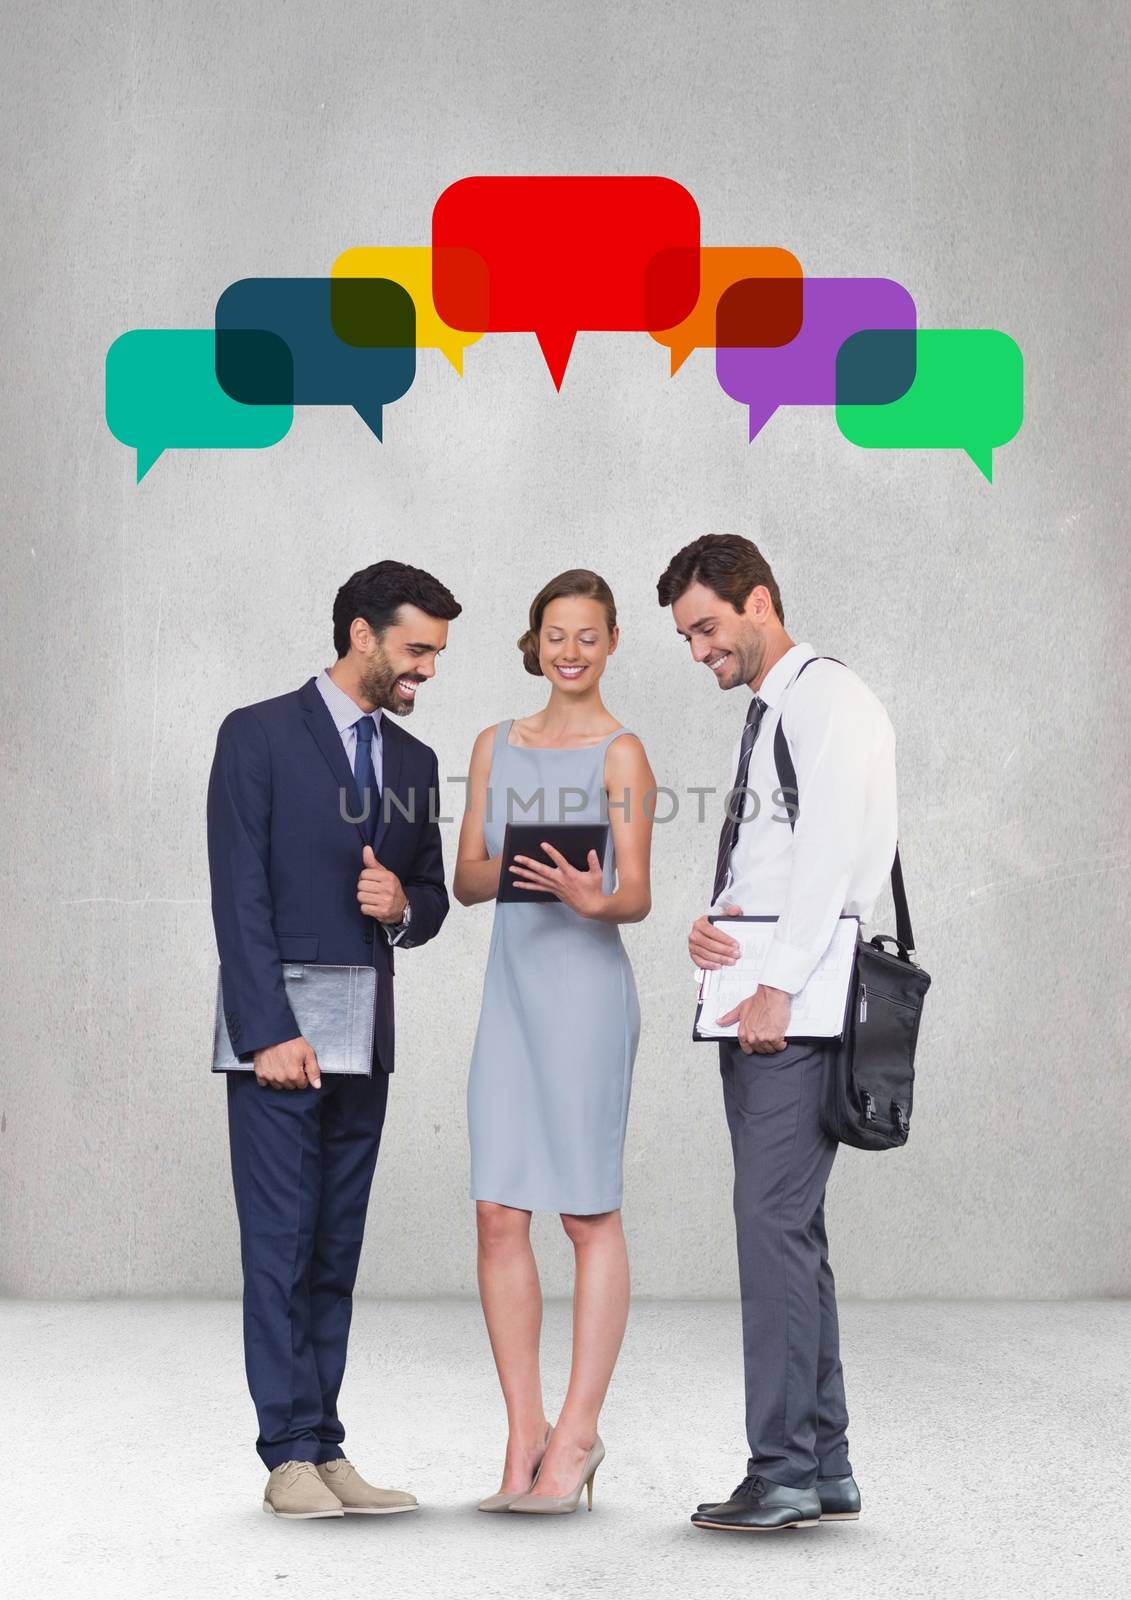 Business people with speech bubble looking at a tablet against grey background by Wavebreakmedia